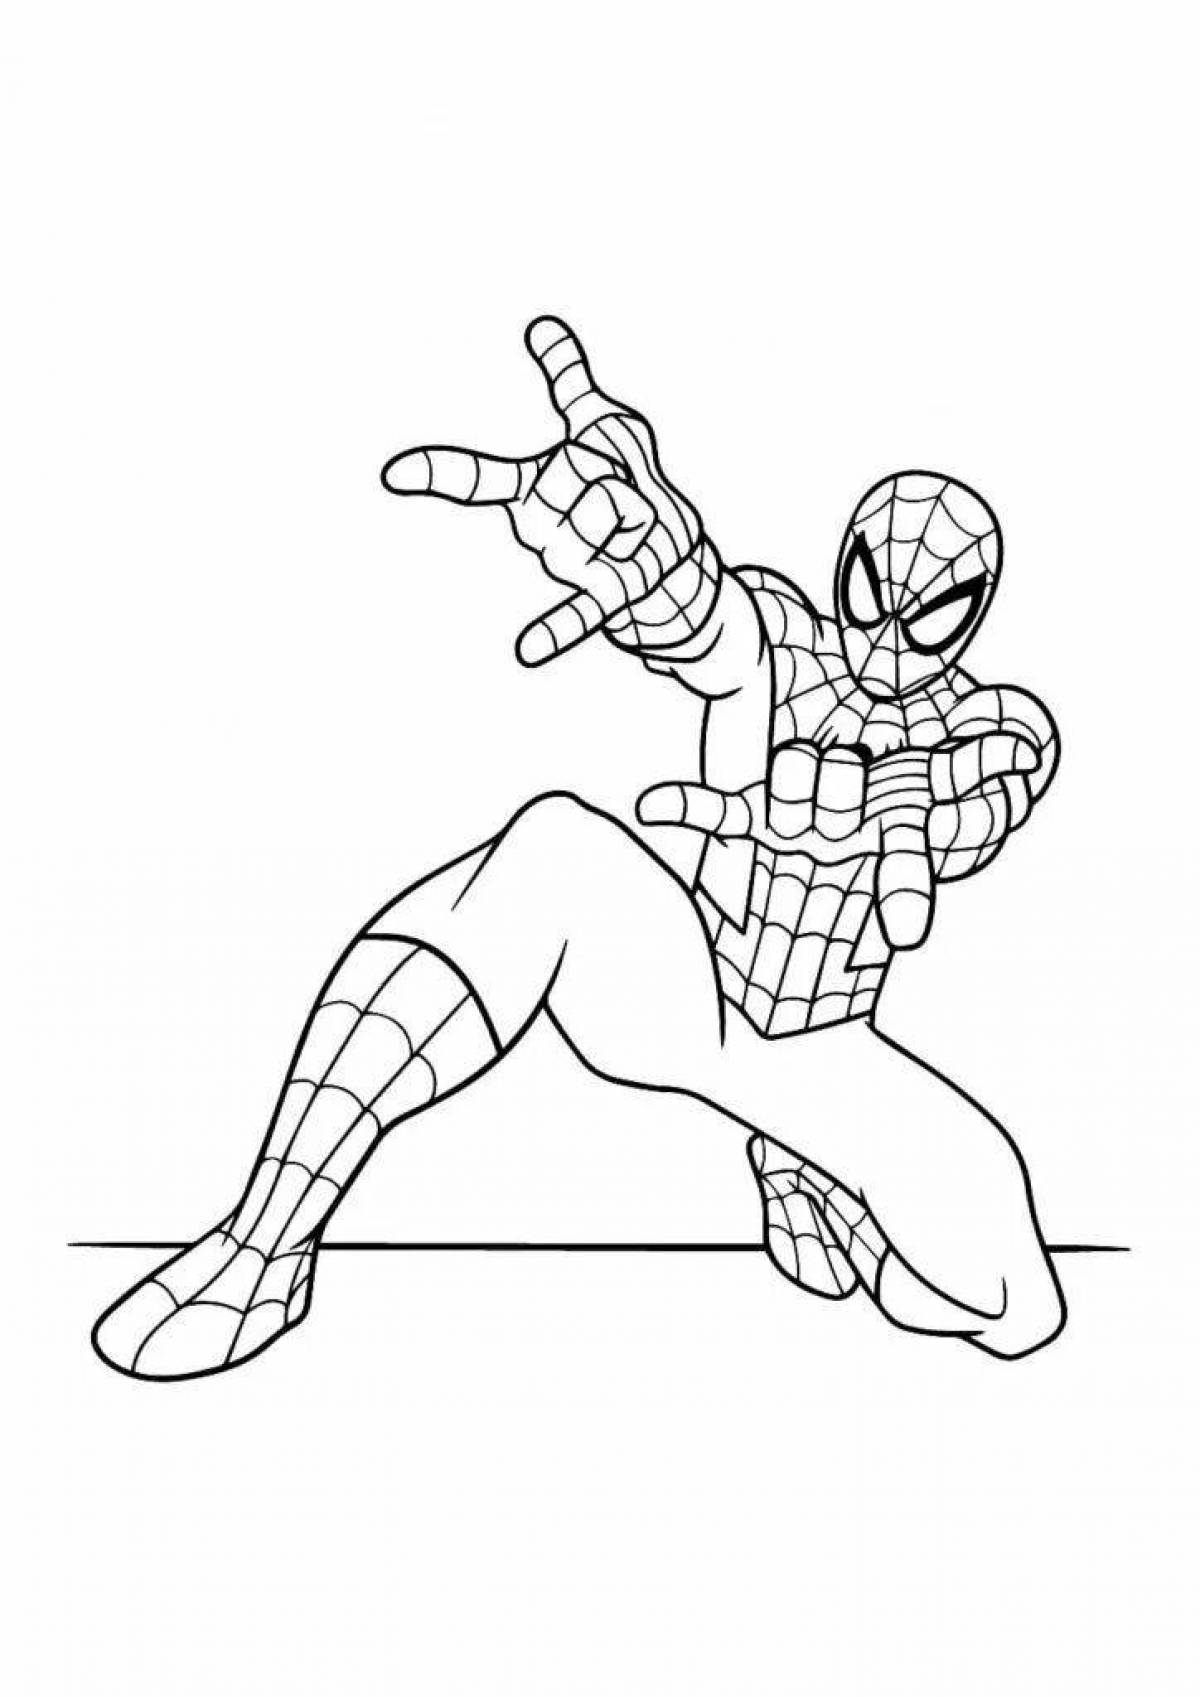 Fantastic spiderman coloring page for kids